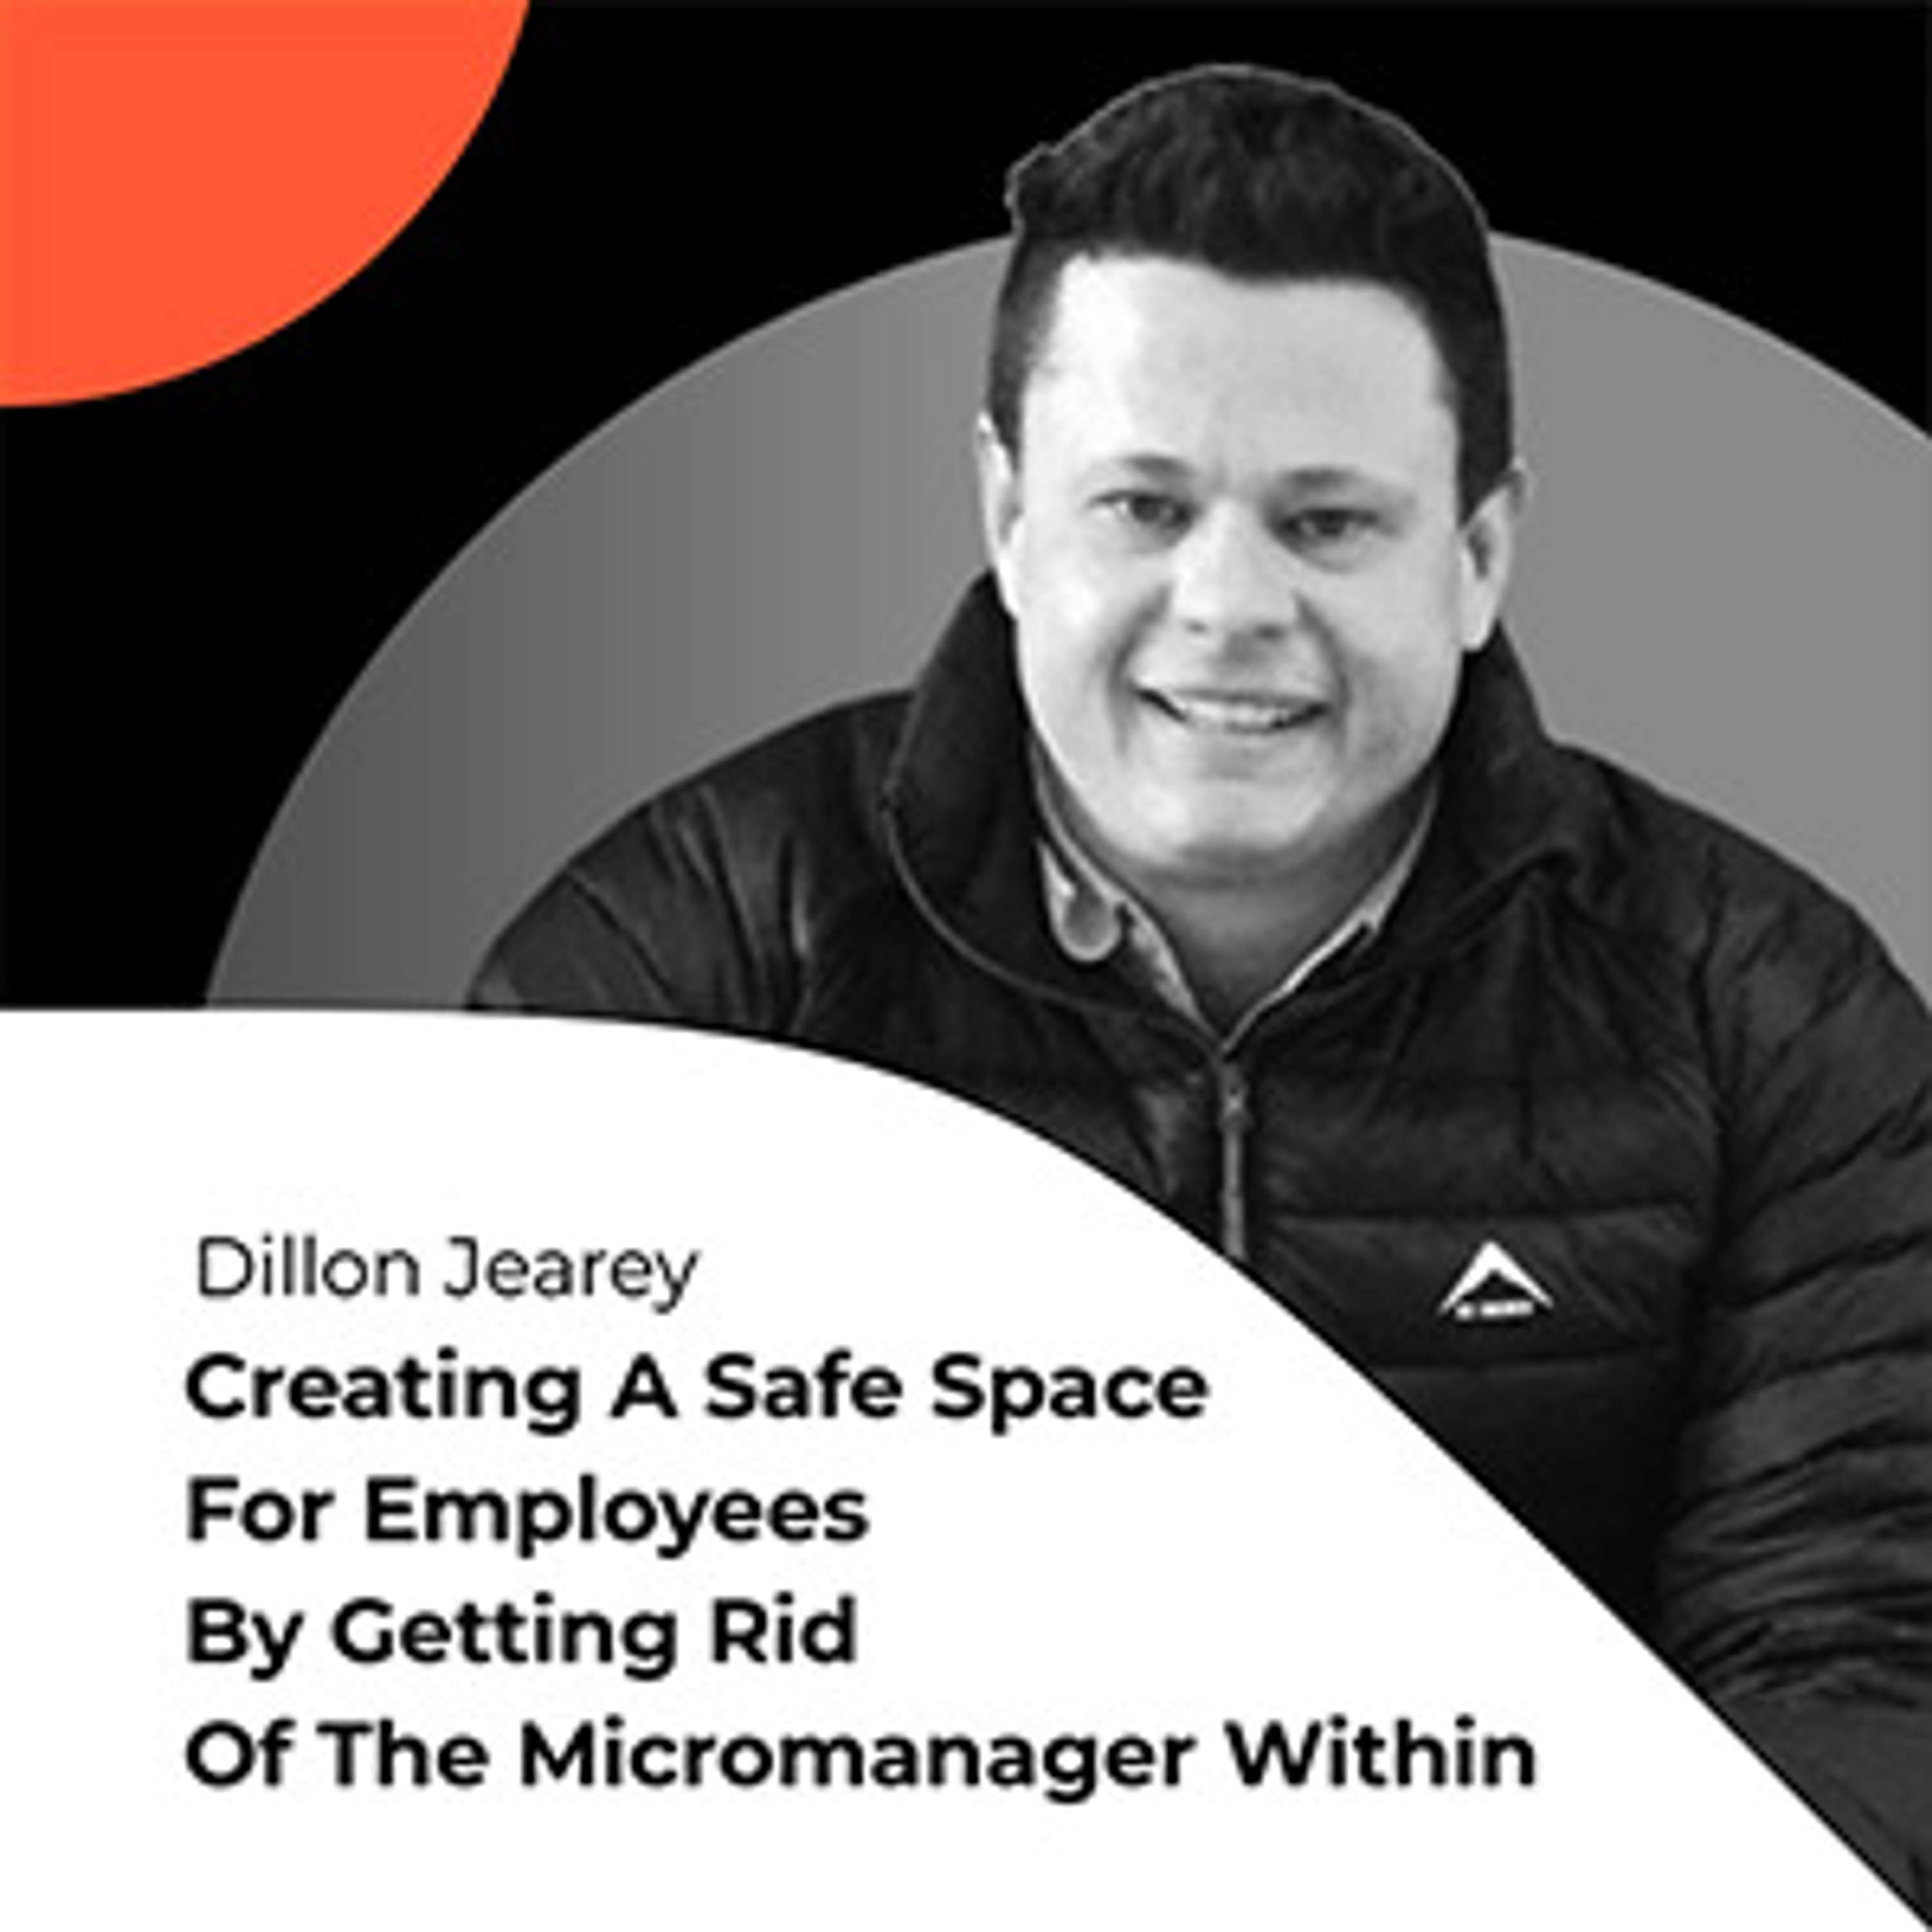 S01E08 Creating a safe space for employees by getting rid of the micromanager within, with Dillon Jearey